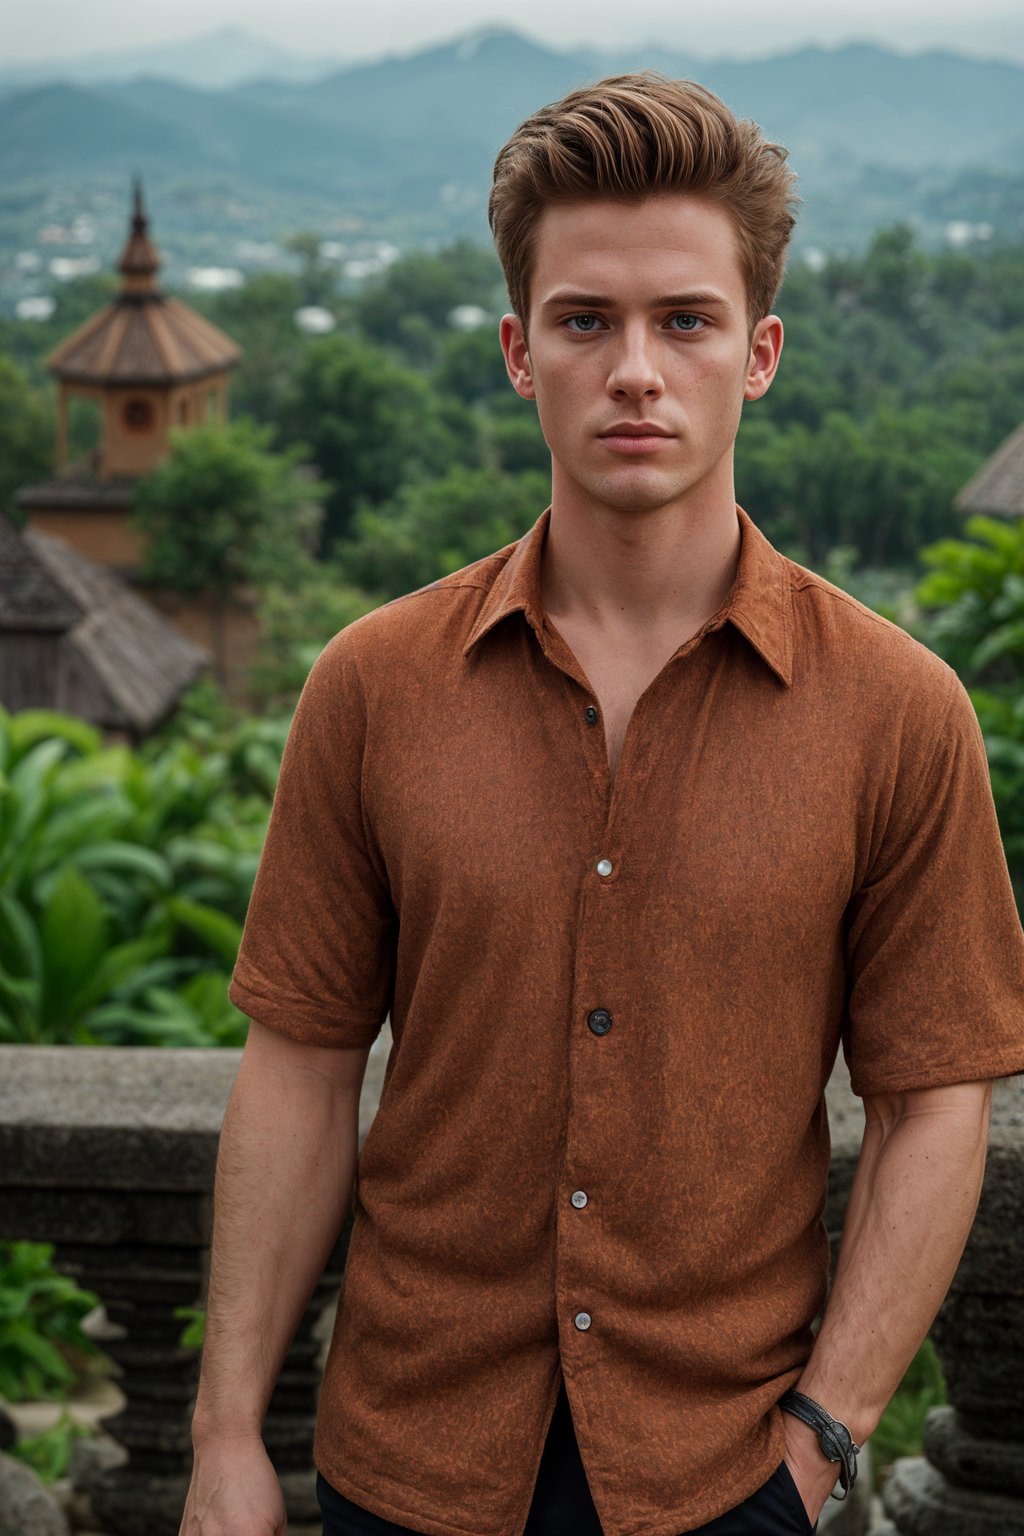 sharp and trendy man in Bali wearing vibrant Batik clothes, Bali, Indonesia in the background